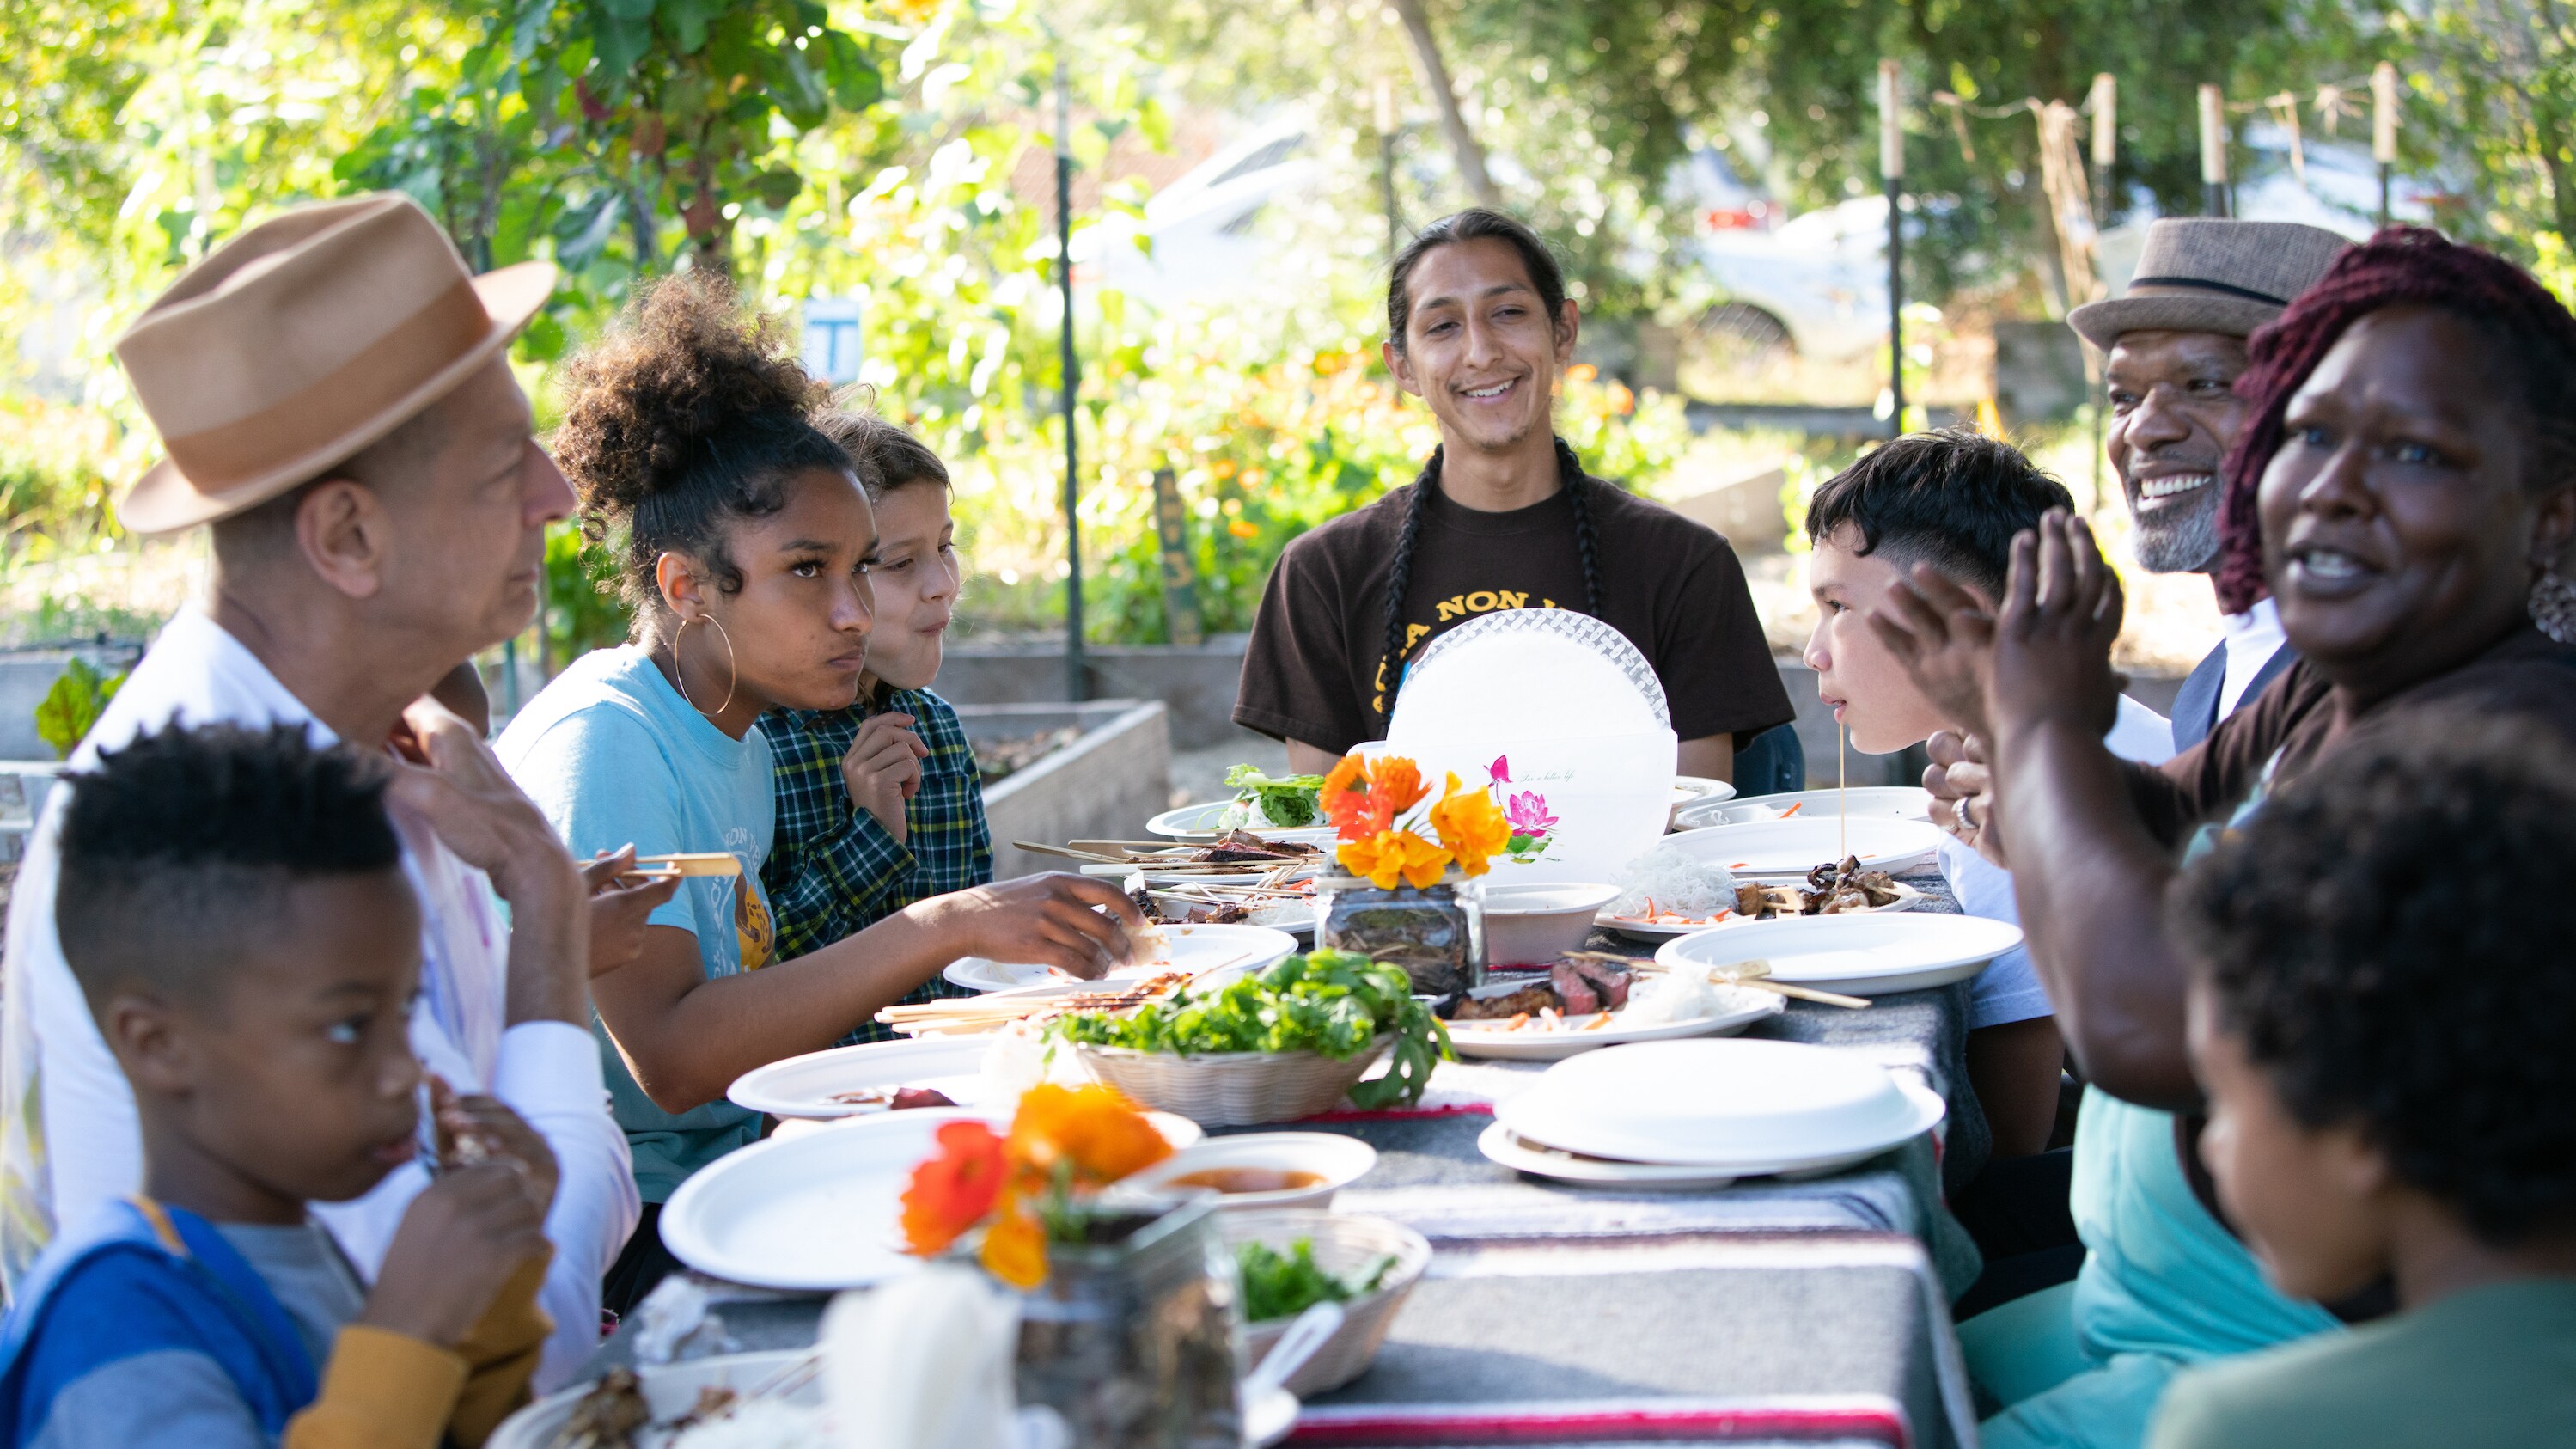 Oakland, CA - Members of the Urban Garden gathered around dining table. (Credit: National Geographic)